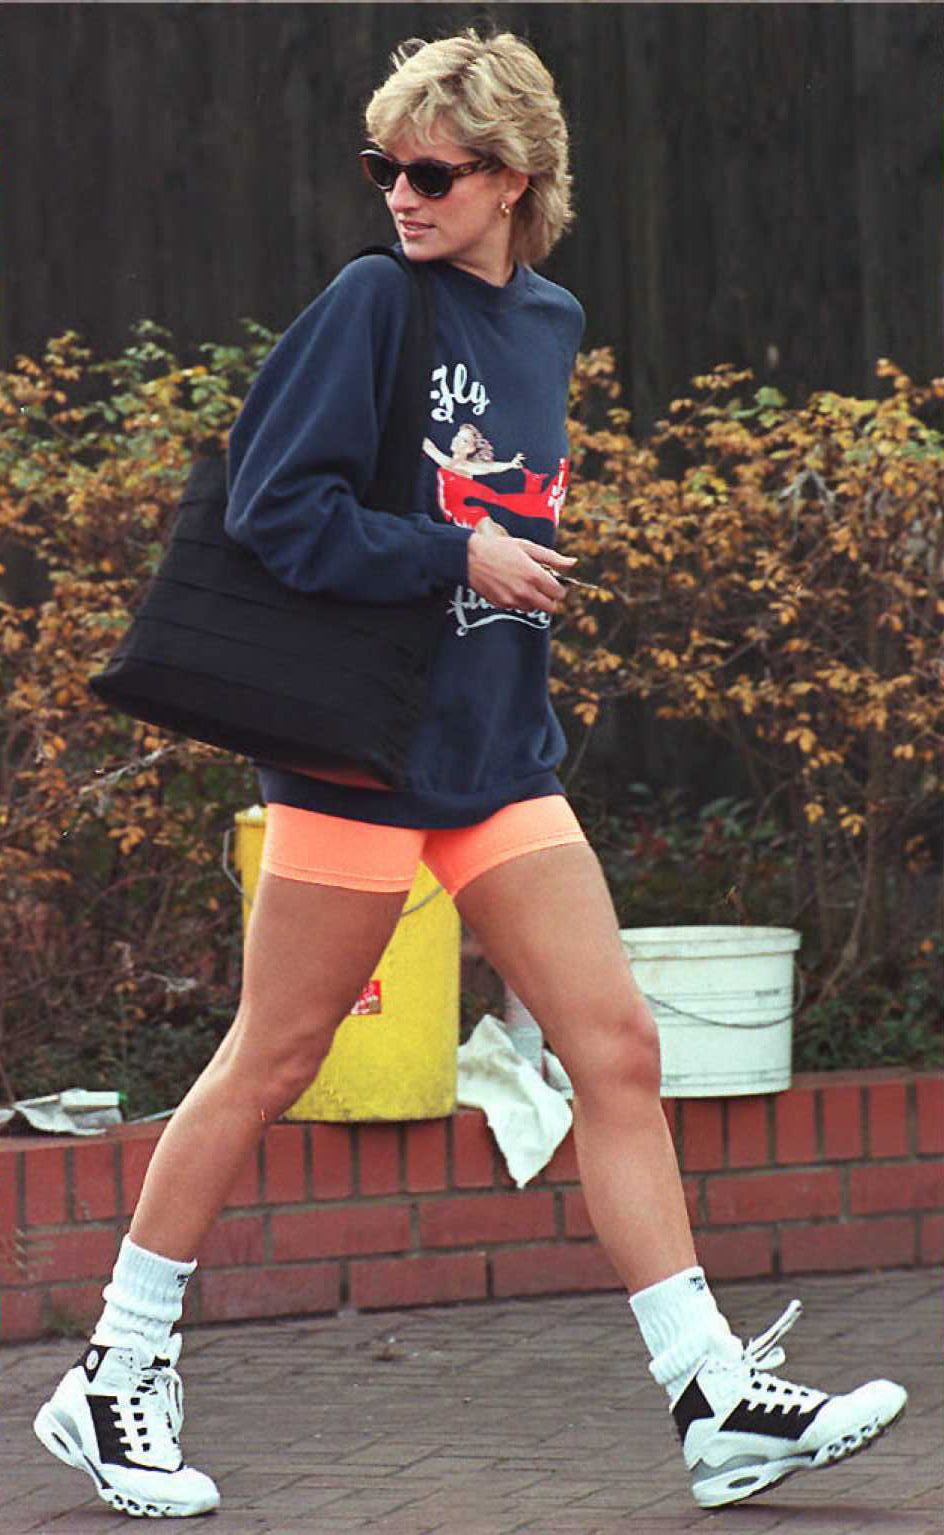 london, united kingdom britains princess of wales departs her london health club 20 november before her controversial tv interview later this evening the princess is expected to divulge her life with prince charles after their marriage afp photo photo credit should read johnny eggittafp via getty images